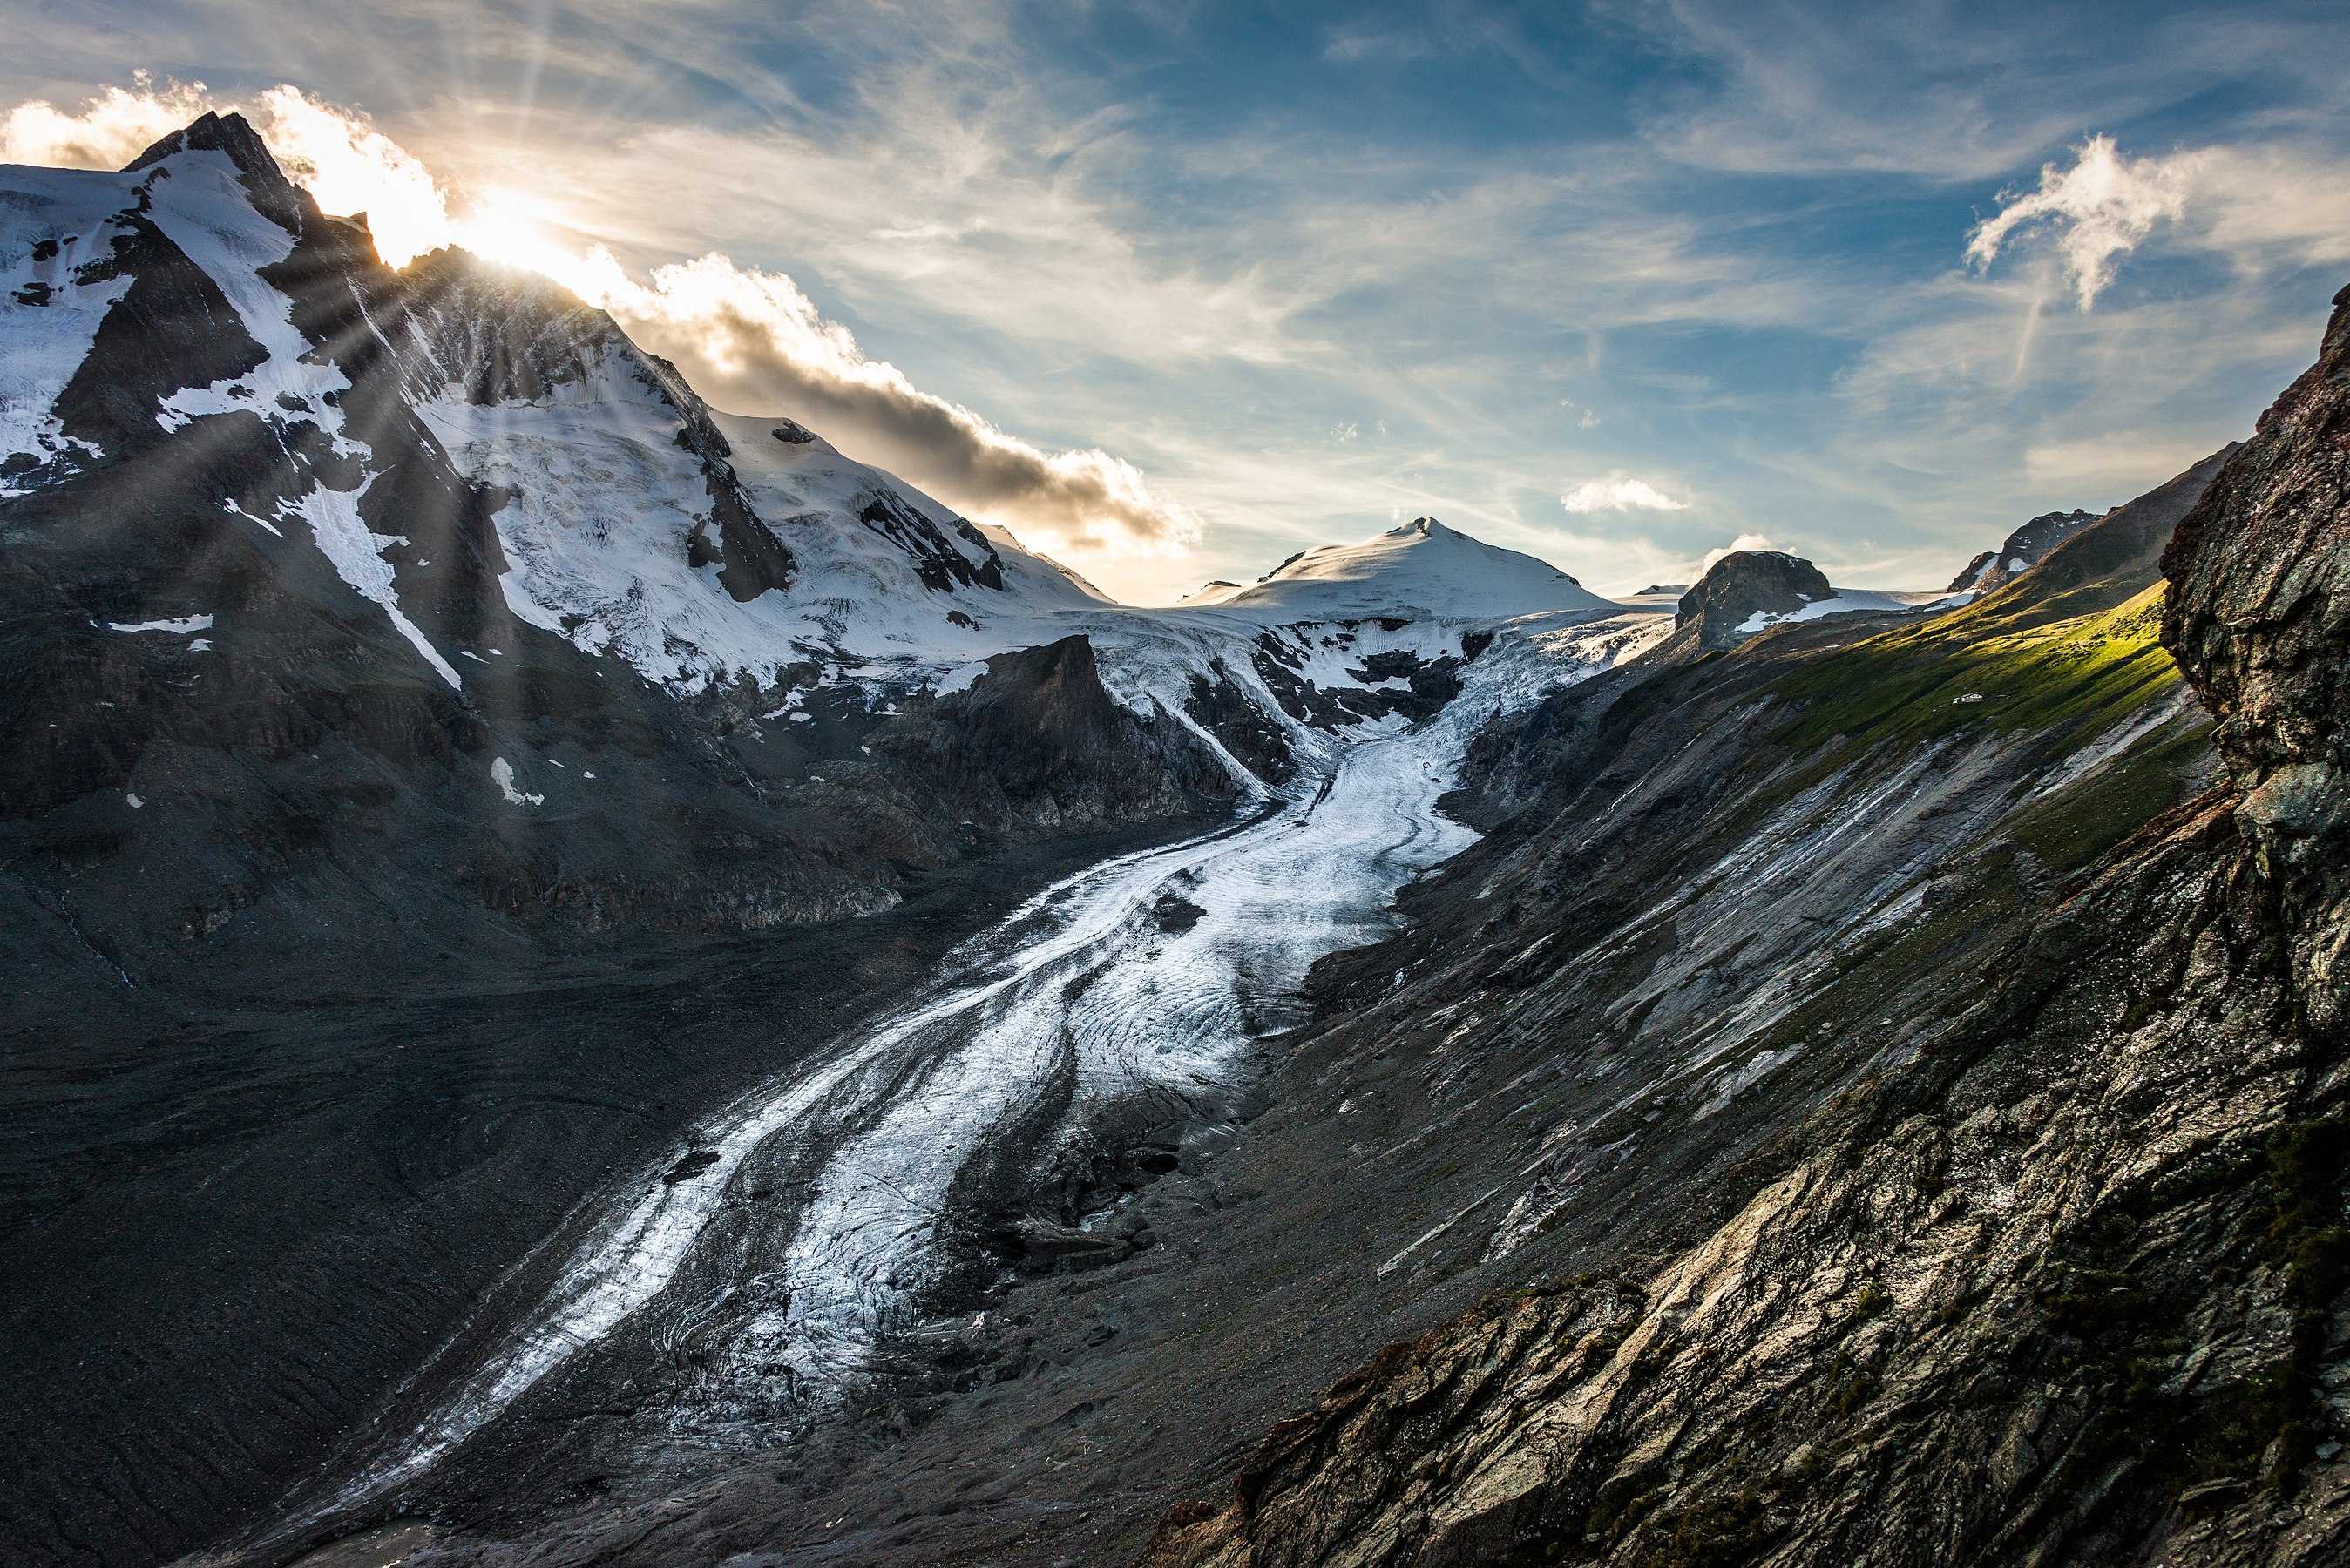 The Pasterze, the longest glacier in Austria, lies within the Hohe Tauern mountain range in Carinthia. The summit on the left side of the image is the Grossglockner, Austria's highest mountain (3,798 m = 12,461 ft). Due to global warming, the Pasterze, once a proud glacier filling the valley, is rapidly fading away. Actually, the Pasterze is the fastest-dying Glacier in the Alps. In 2013 it lost about 100 meters of its length, by Bernd Thaller